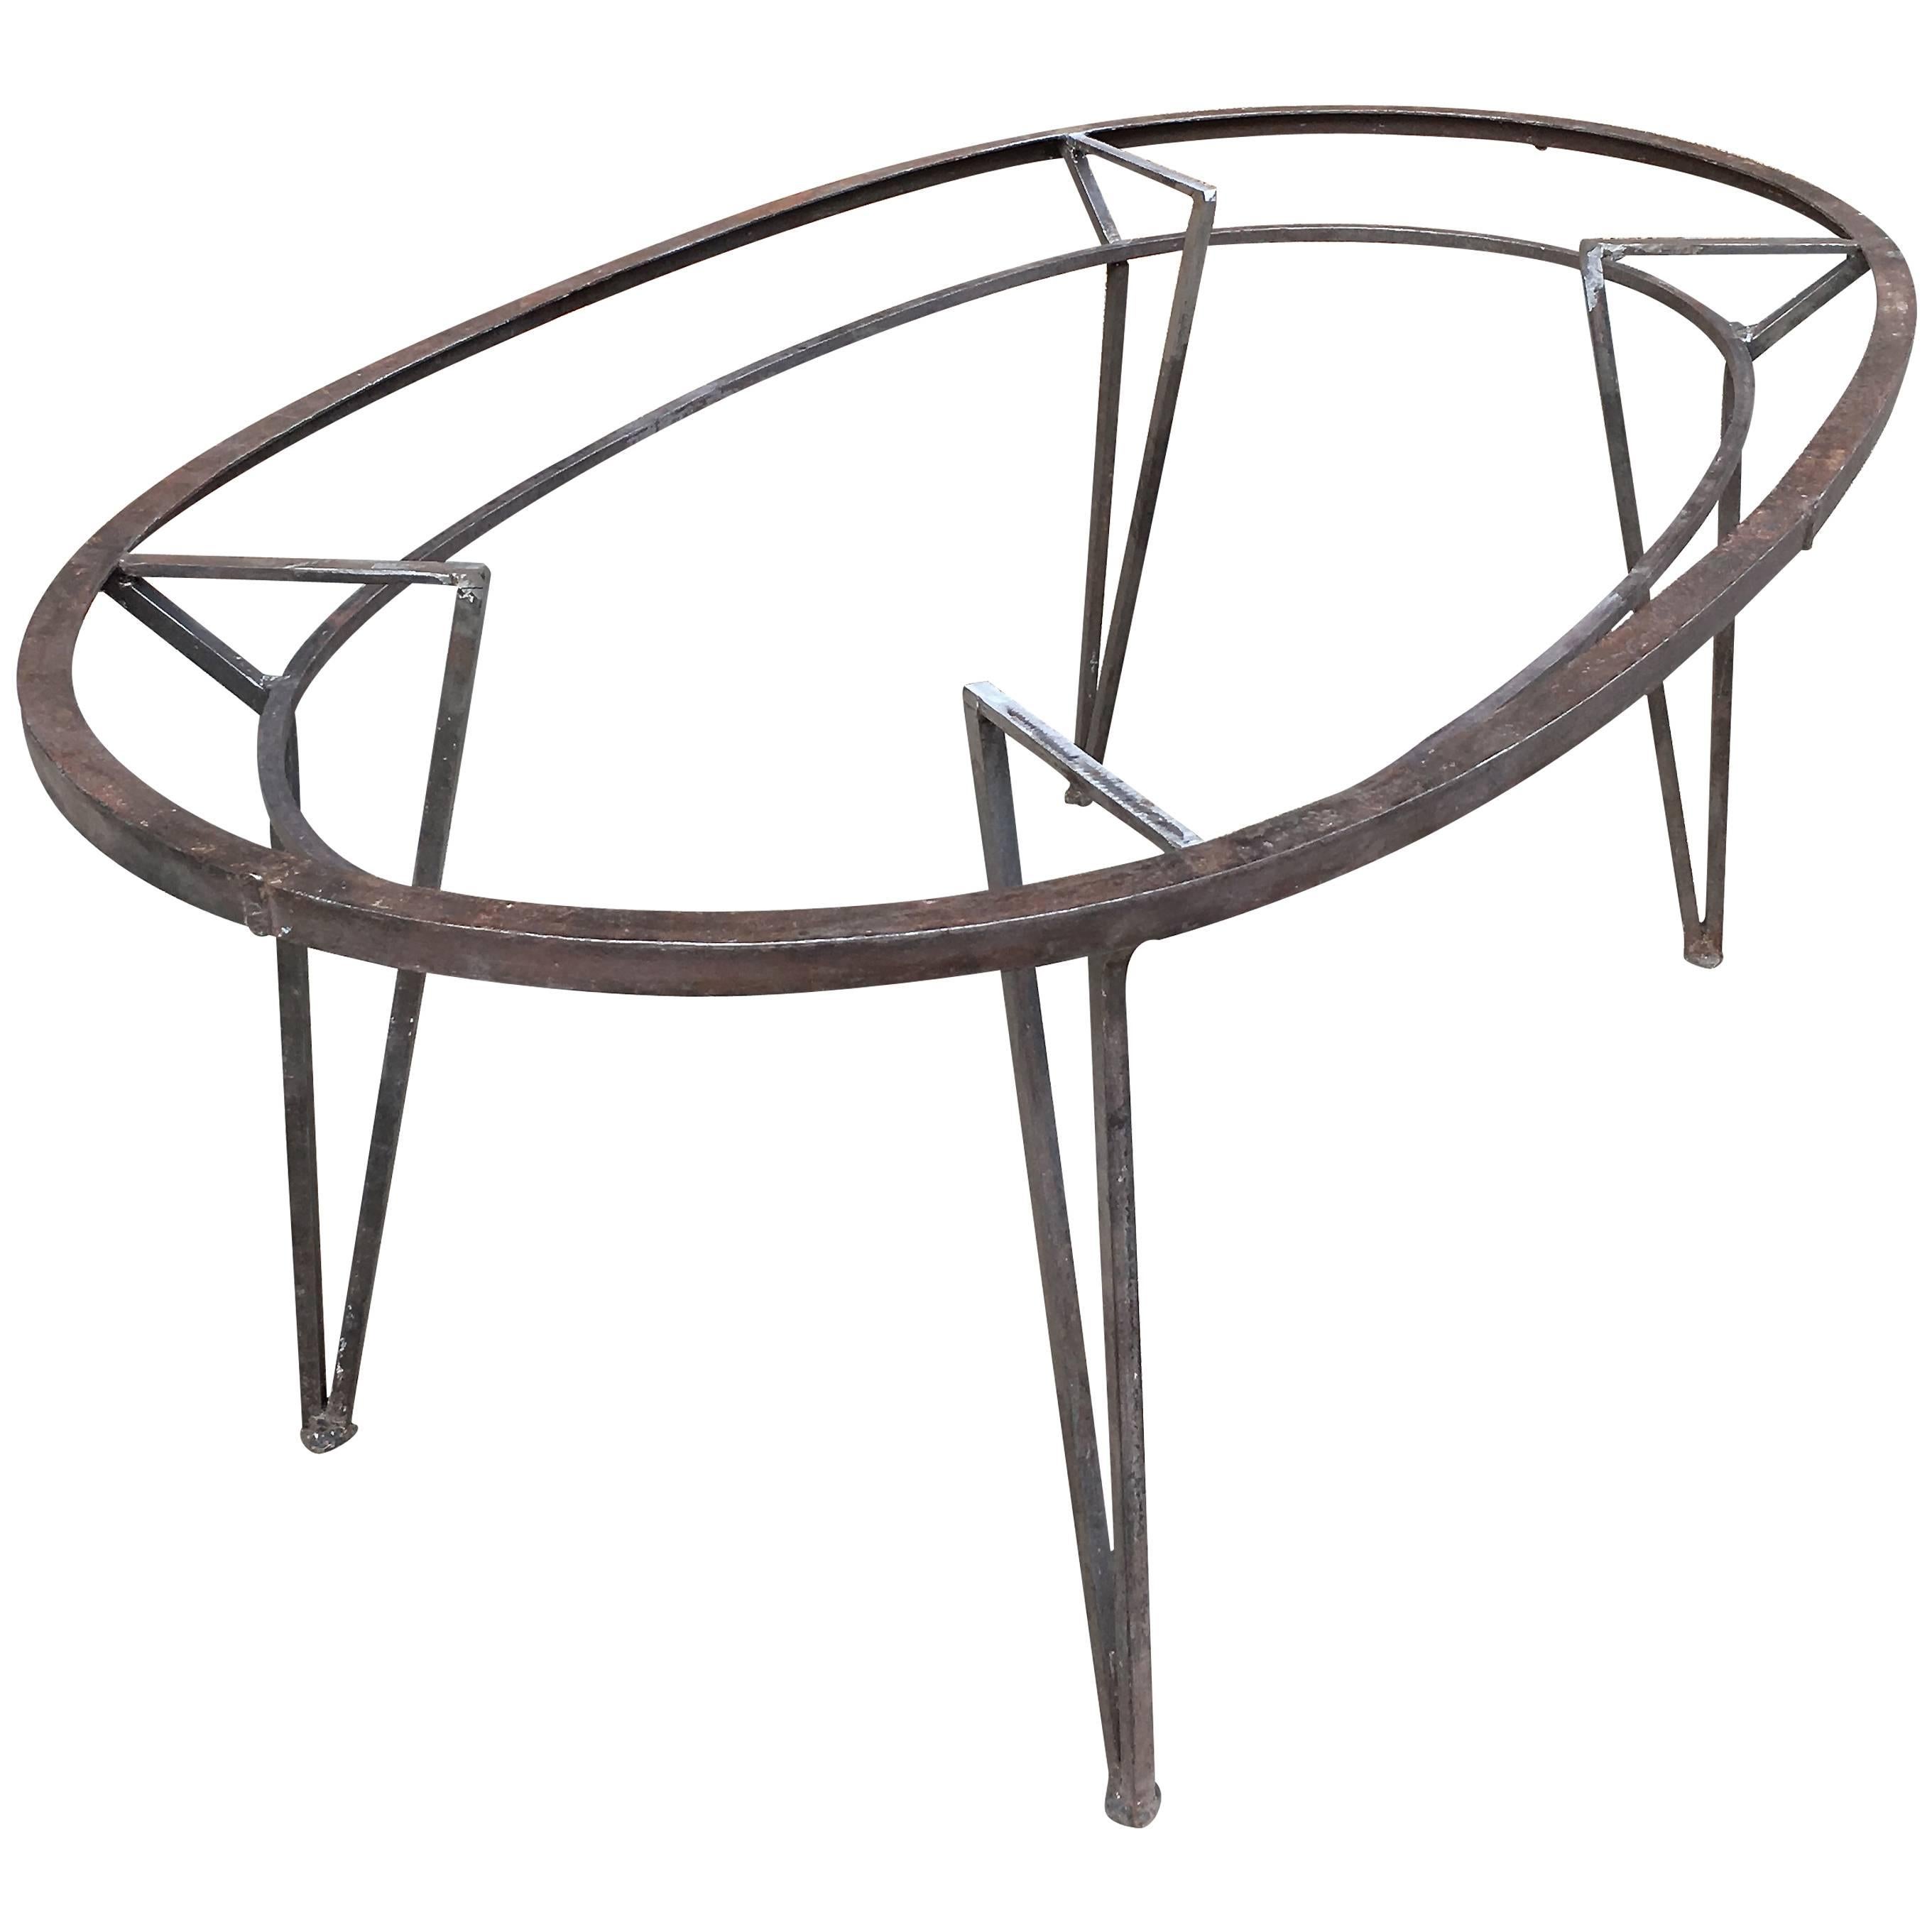 Architectural Brushed Steel Oval Outdoor Patio Dining Table